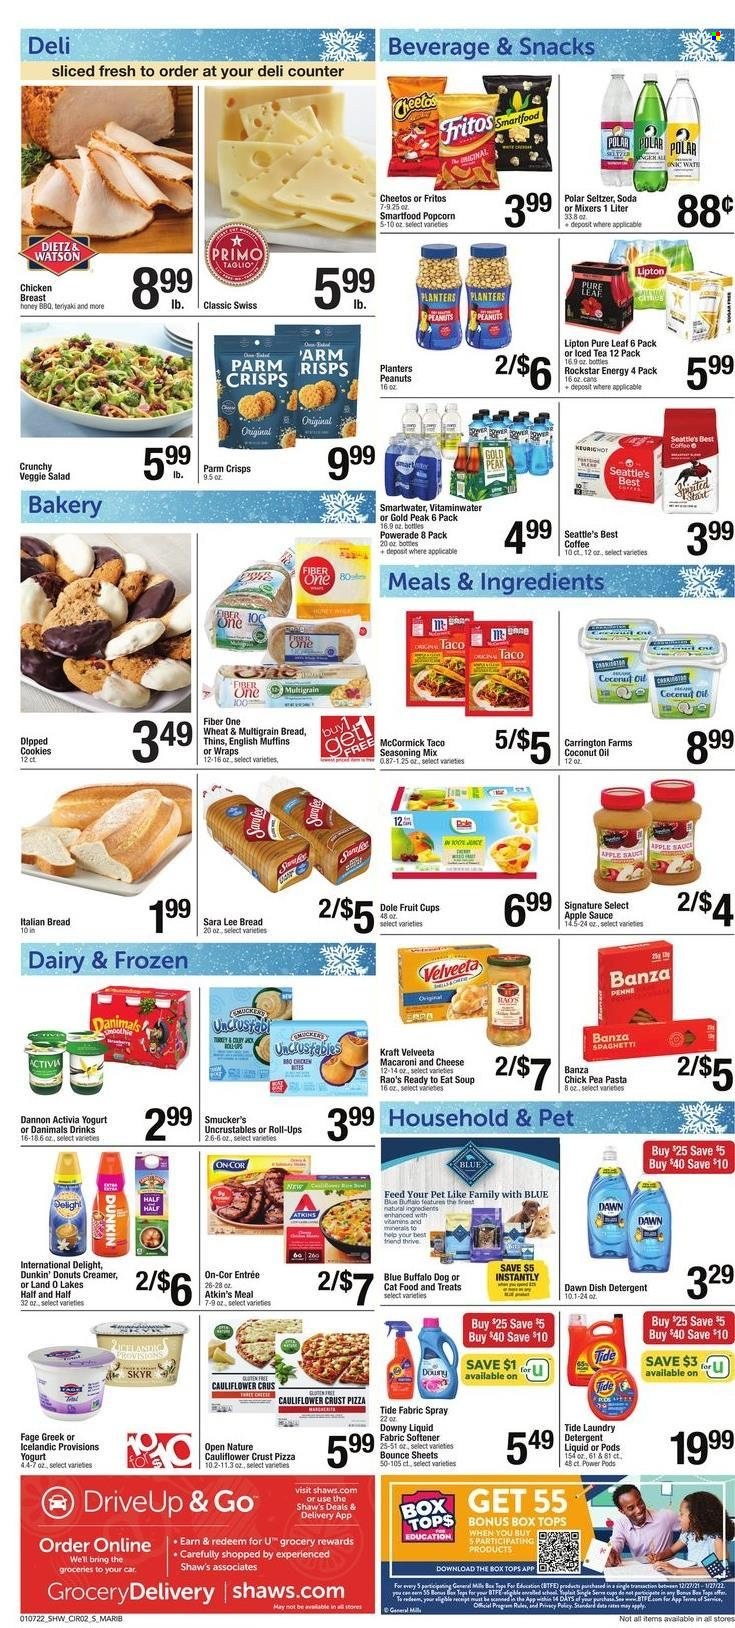 thumbnail - Shaw’s Flyer - 01/07/2022 - 01/13/2022 - Sales products - fruit cup, english muffins, multigrain bread, Sara Lee, wraps, donut, Dunkin' Donuts, Dole, macaroni & cheese, spaghetti, pizza, soup, pasta, Kraft®, yoghurt, Activia, Dannon, Danimals, creamer, cookies, snack, Fritos, Cheetos, Smartfood, Thins, popcorn, Fiber One, penne, spice, coconut oil, oil, apple sauce, honey, peanuts, Planters, Powerade, Lipton, ice tea, Rockstar, seltzer water, soda, Smartwater, Pure Leaf, coffee, chicken breasts, detergent, Tide, fabric softener, Bounce, Downy Laundry, ruler, animal food, Blue Buffalo, cat food, Half and half. Page 2.